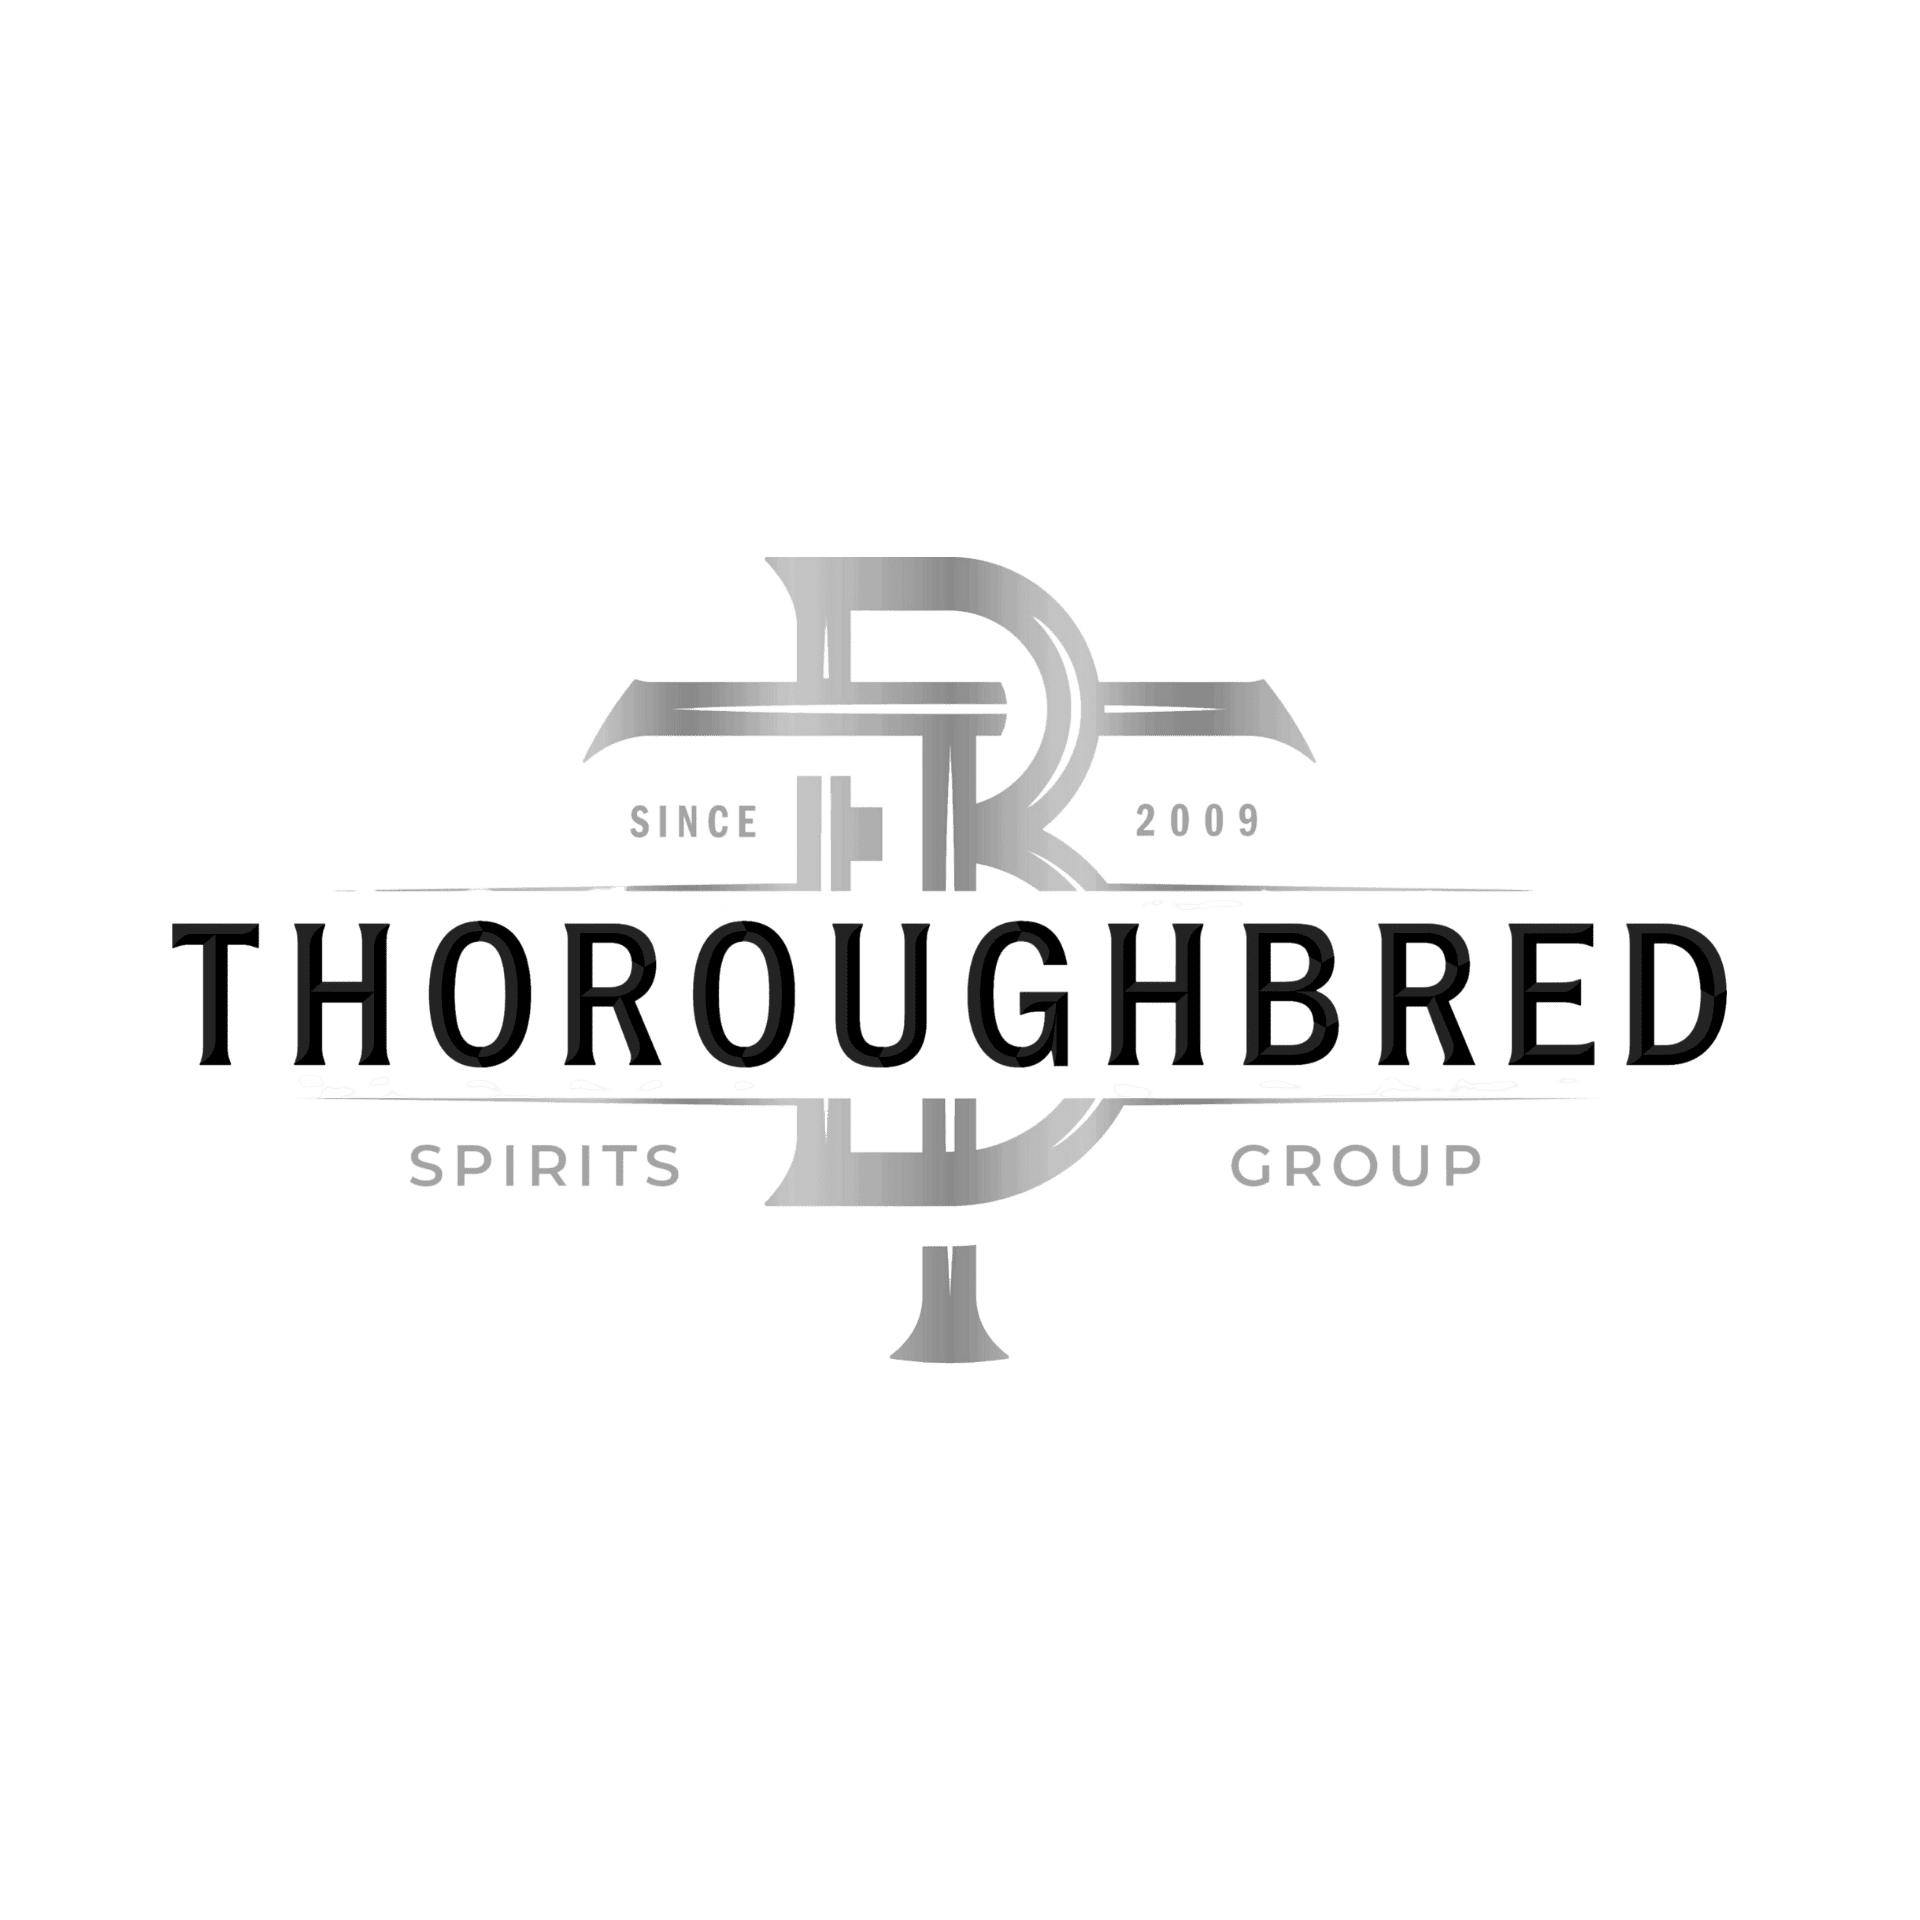 THOROUGHBRED Group